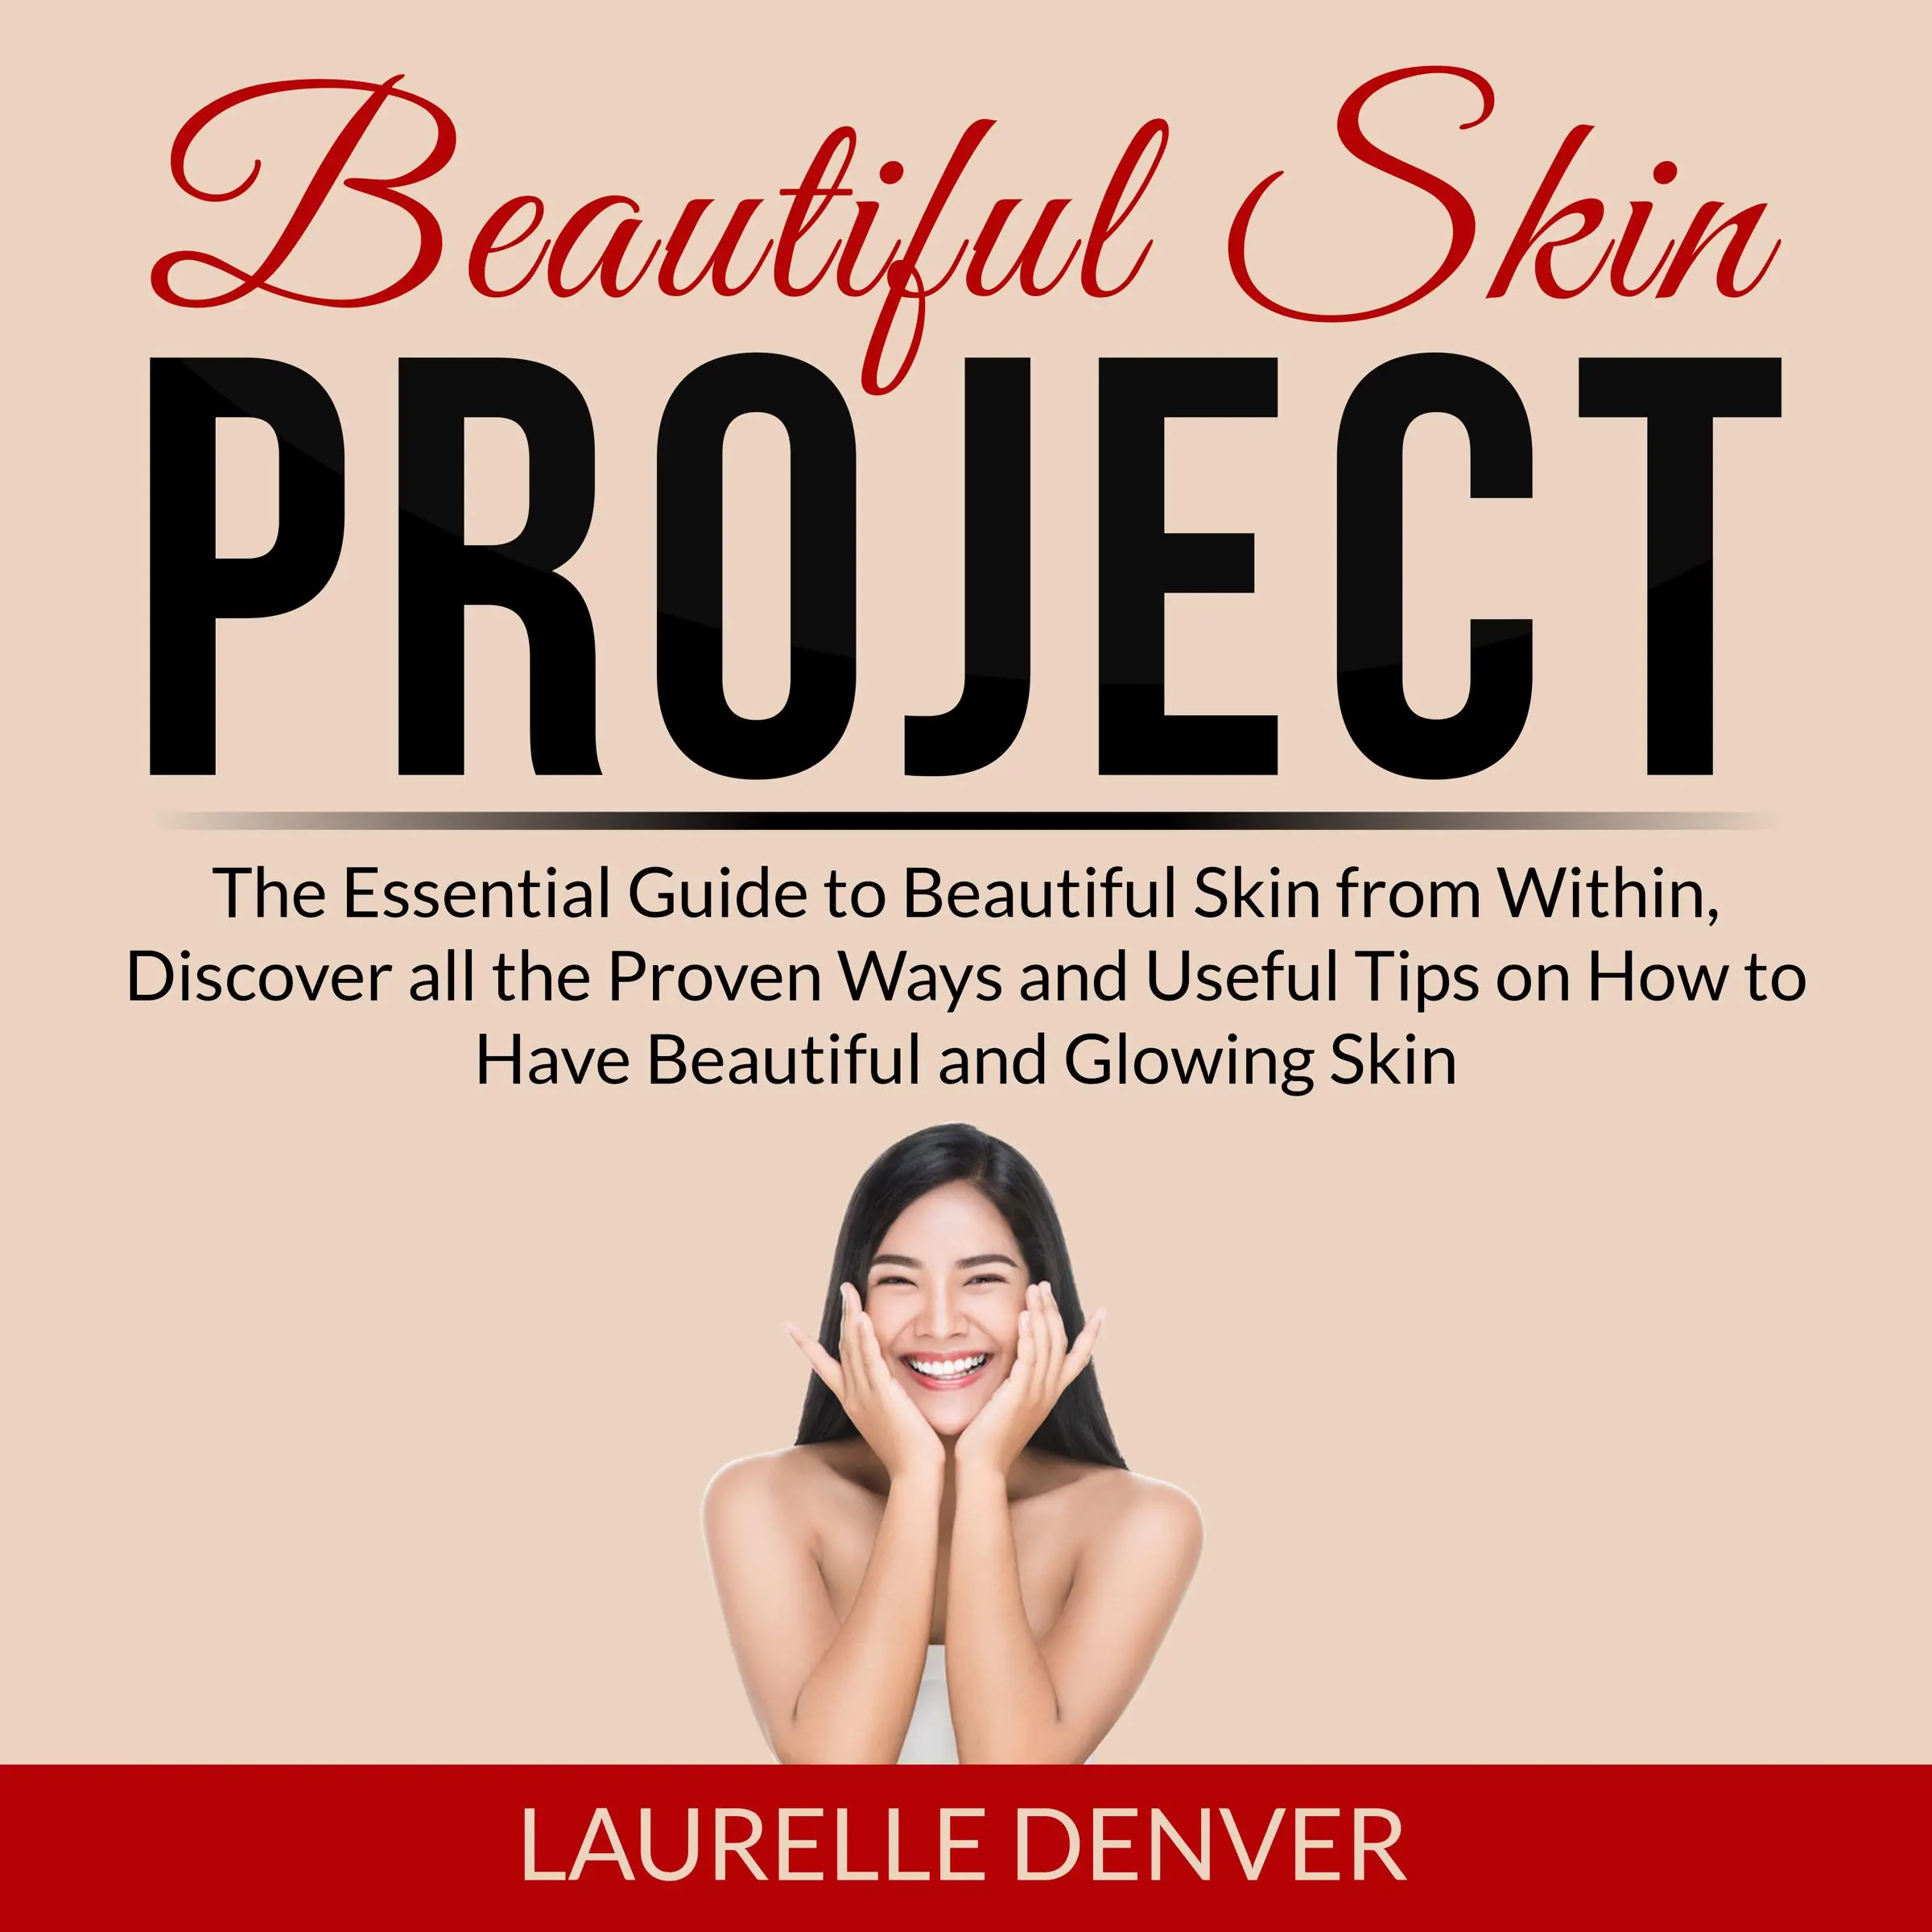 Beautiful Skin Project: The Essential Guide to Beautiful Skin from Within, Discover all the Proven Ways and Useful Tips on How to Have Beautiful and Glowing Skin Audiobook by Laurelle Denver